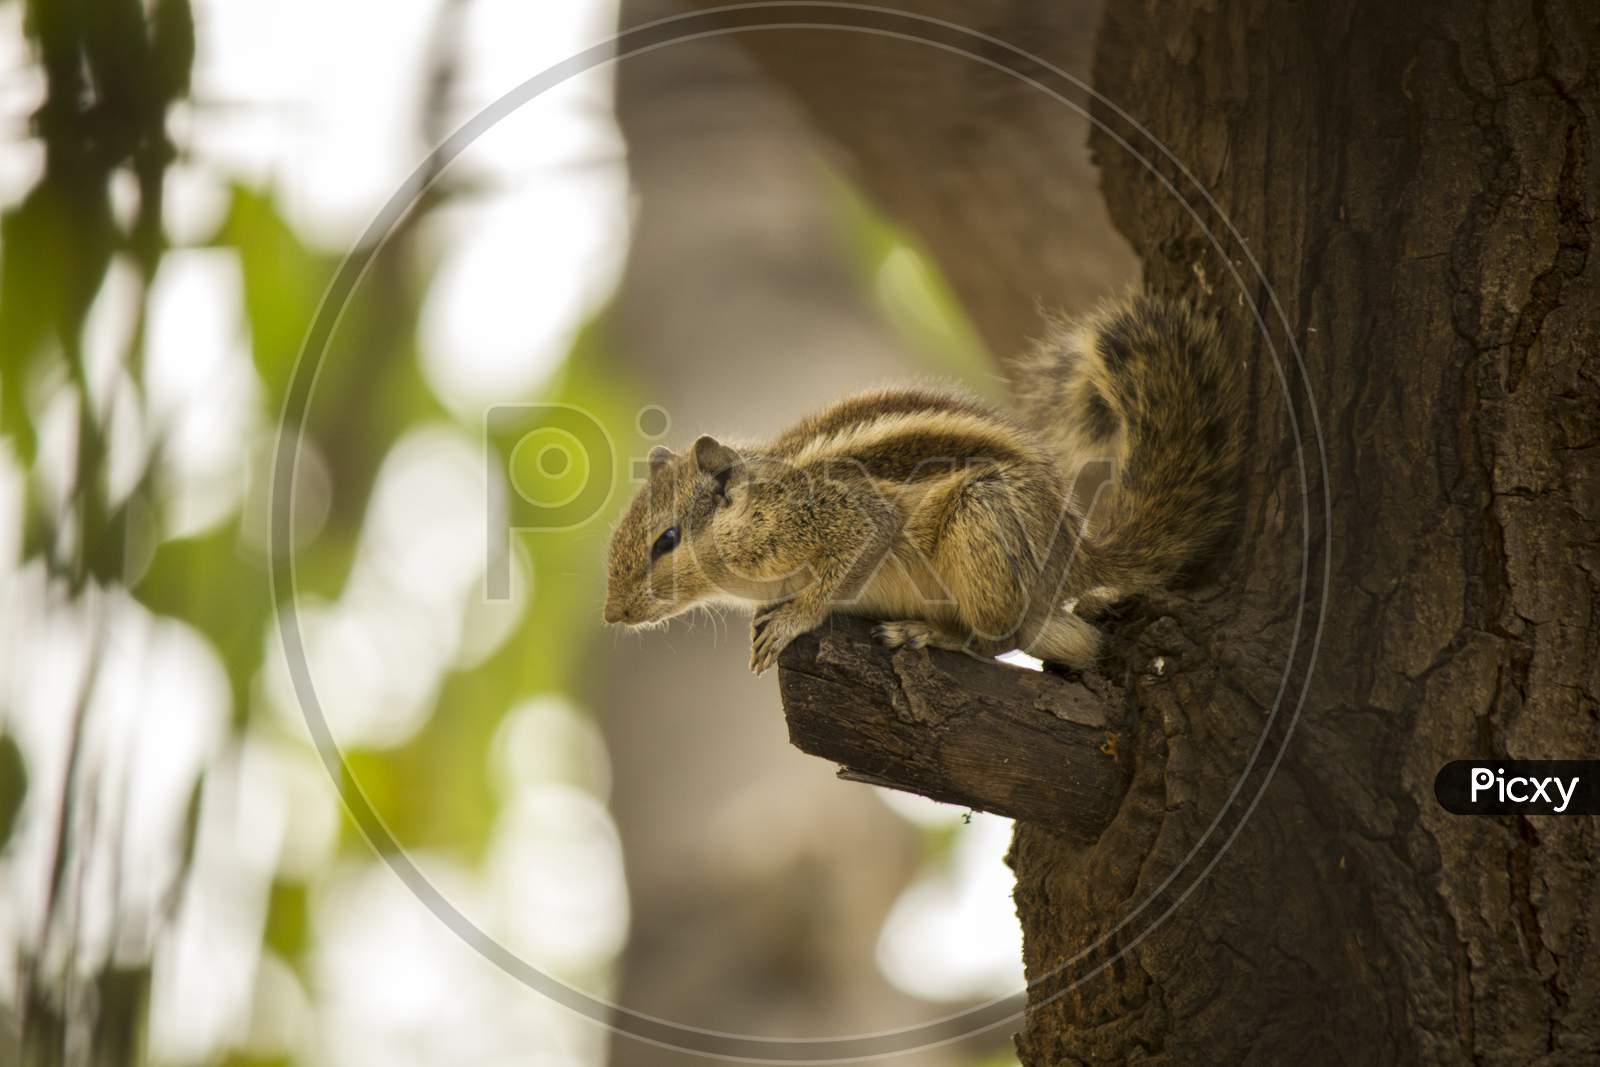 Squirrel on a tree